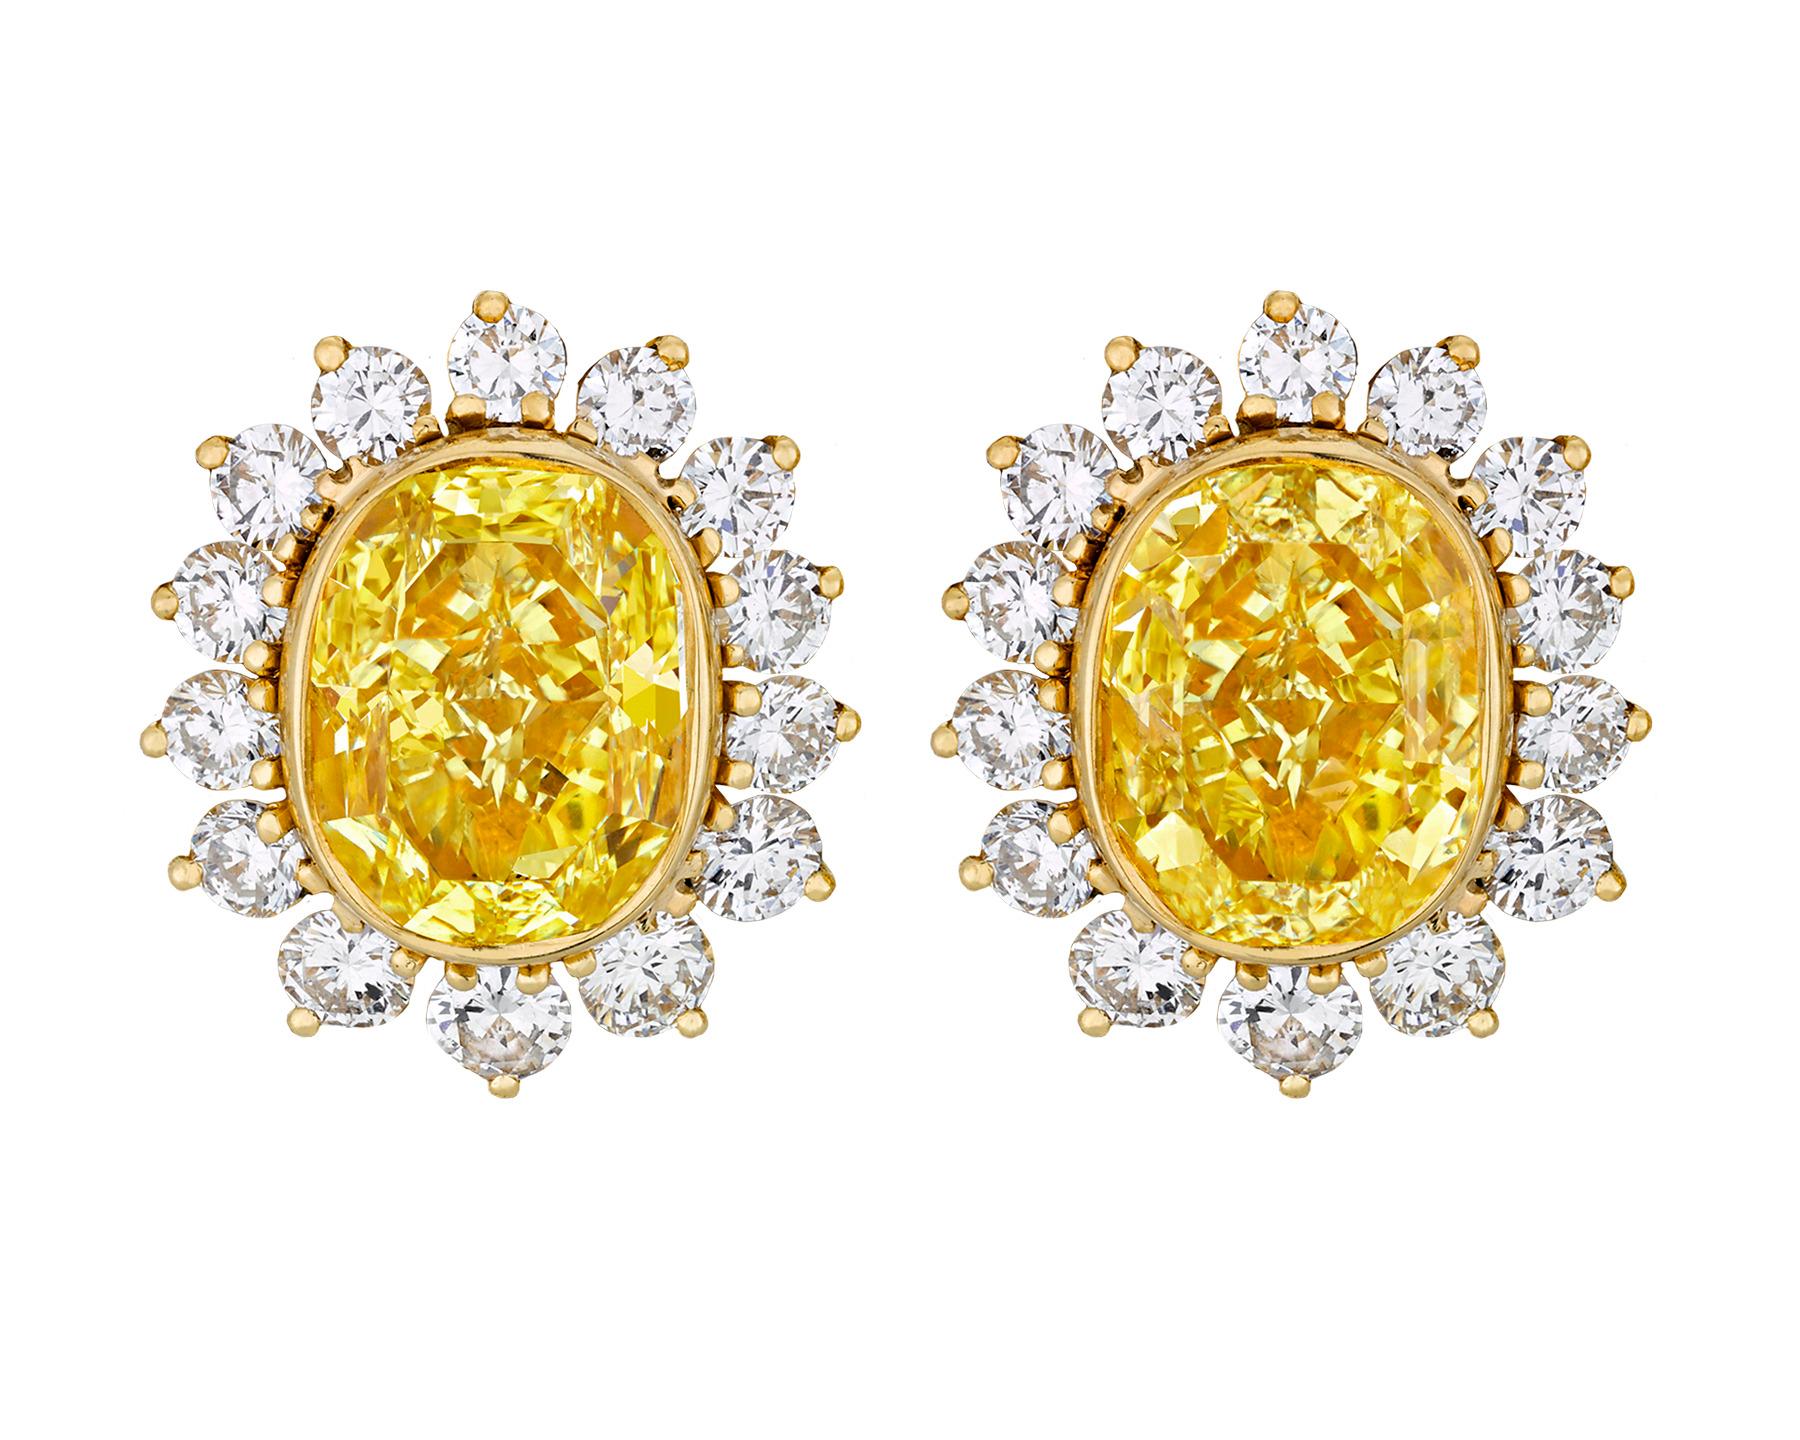 Two perfectly matched fancy intense yellow diamonds totaling 11.36 carats are at the center of these glamorous convertible earrings. Weighing 5.73 carats and 5.63 carats, the exceptionally rare gems possess the radiant, highly saturated lemon yellow